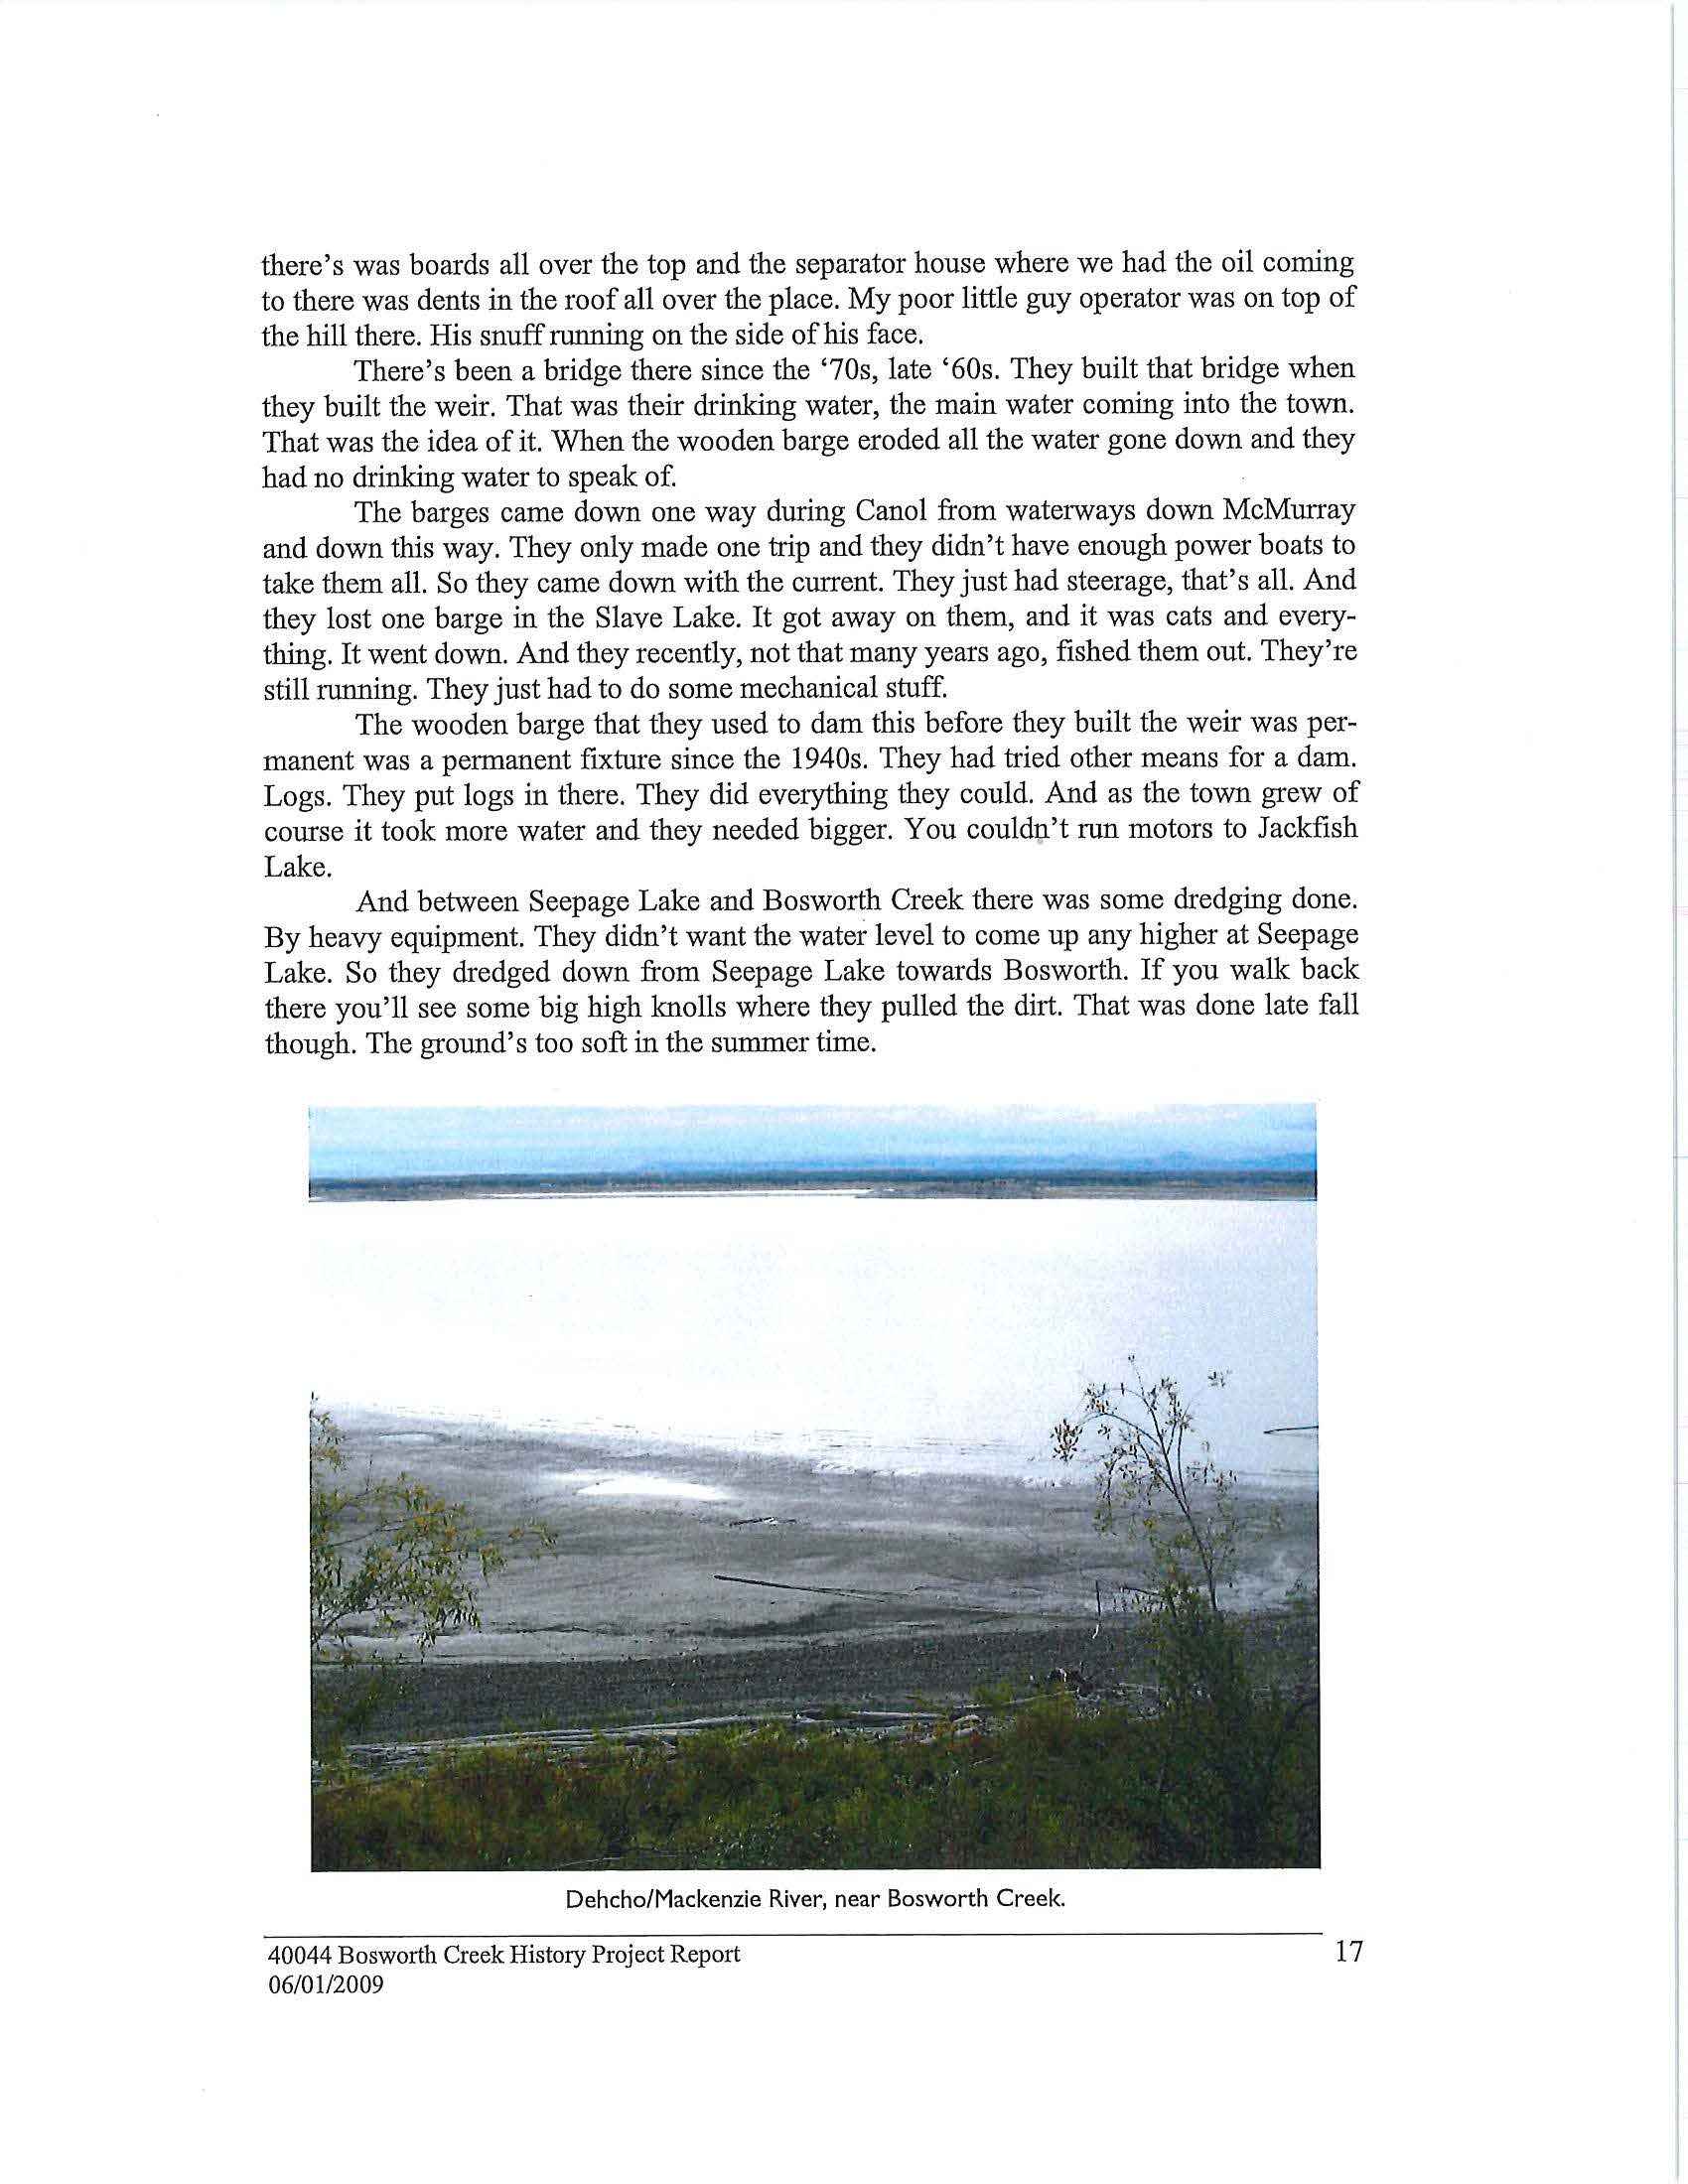 Bosworth Creek History Project Page 22